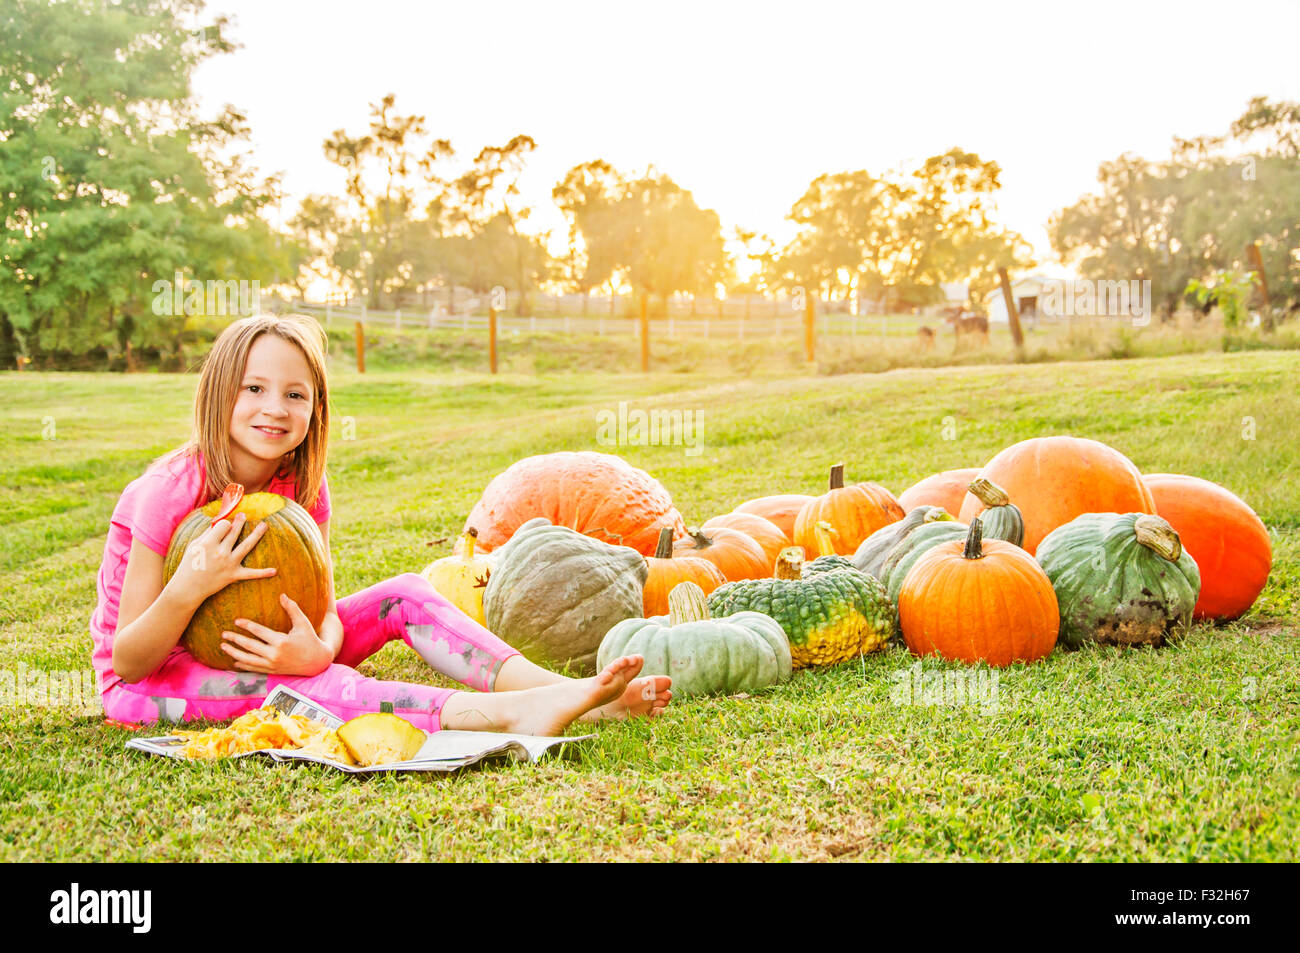 Girl by pumpkins and squash Stock Photo